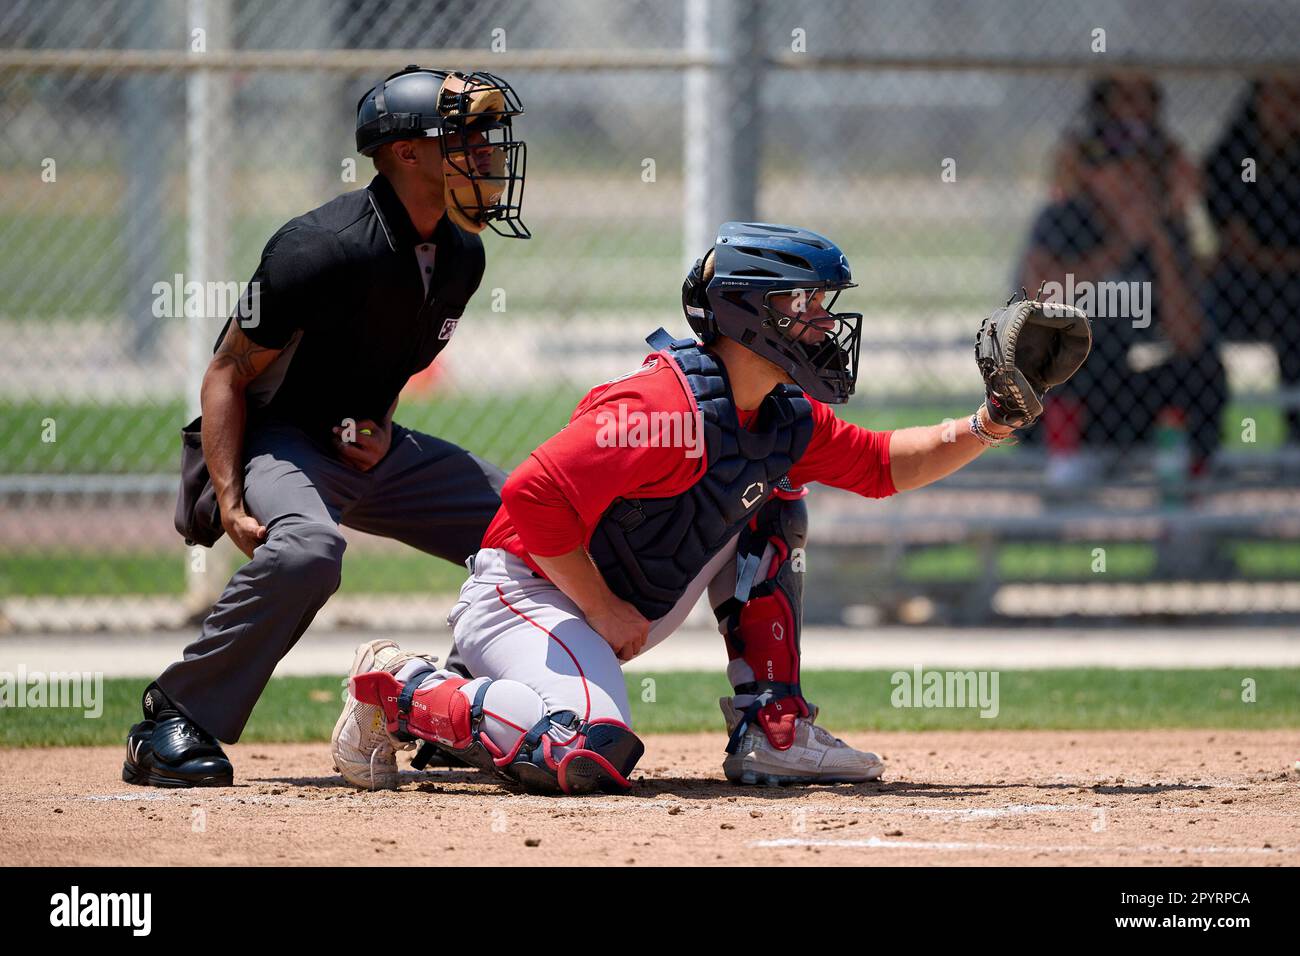 https://c8.alamy.com/comp/2PYRPCA/umpire-sam-glickman-and-boston-red-sox-catcher-brooks-brannon-17-await-the-pitch-during-an-extended-spring-training-baseball-game-against-the-minnesota-twins-on-may-4-2023-at-century-link-sports-complex-in-fort-myers-florida-mike-janesfour-seam-images-via-ap-2PYRPCA.jpg